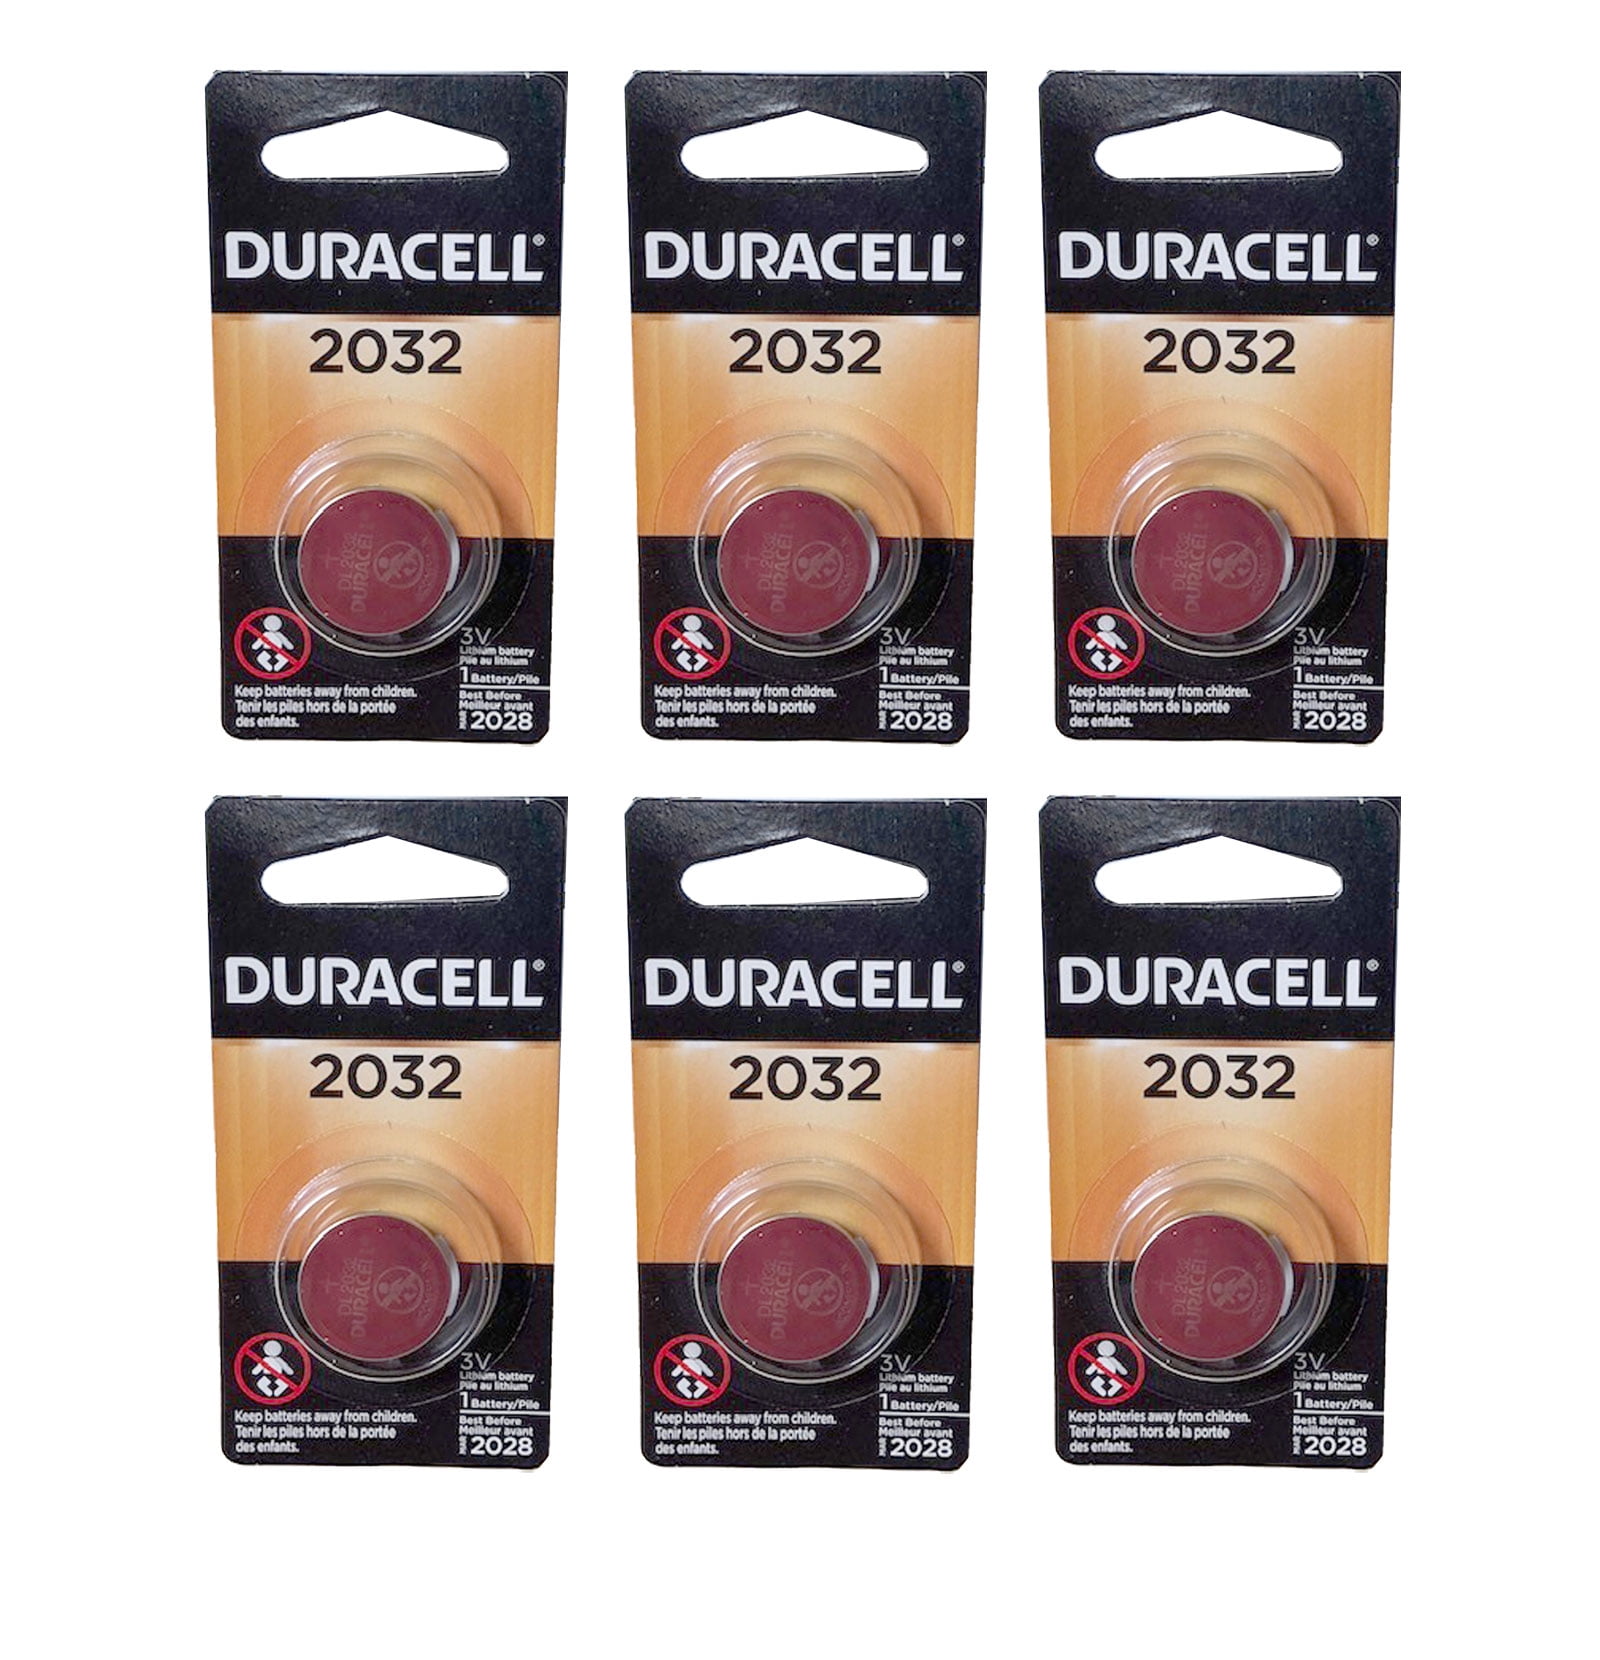 12 x Duracell CR2032 3V Lithium Coin Cell Battery 2032, DL2032, BR2032,  SB-T15